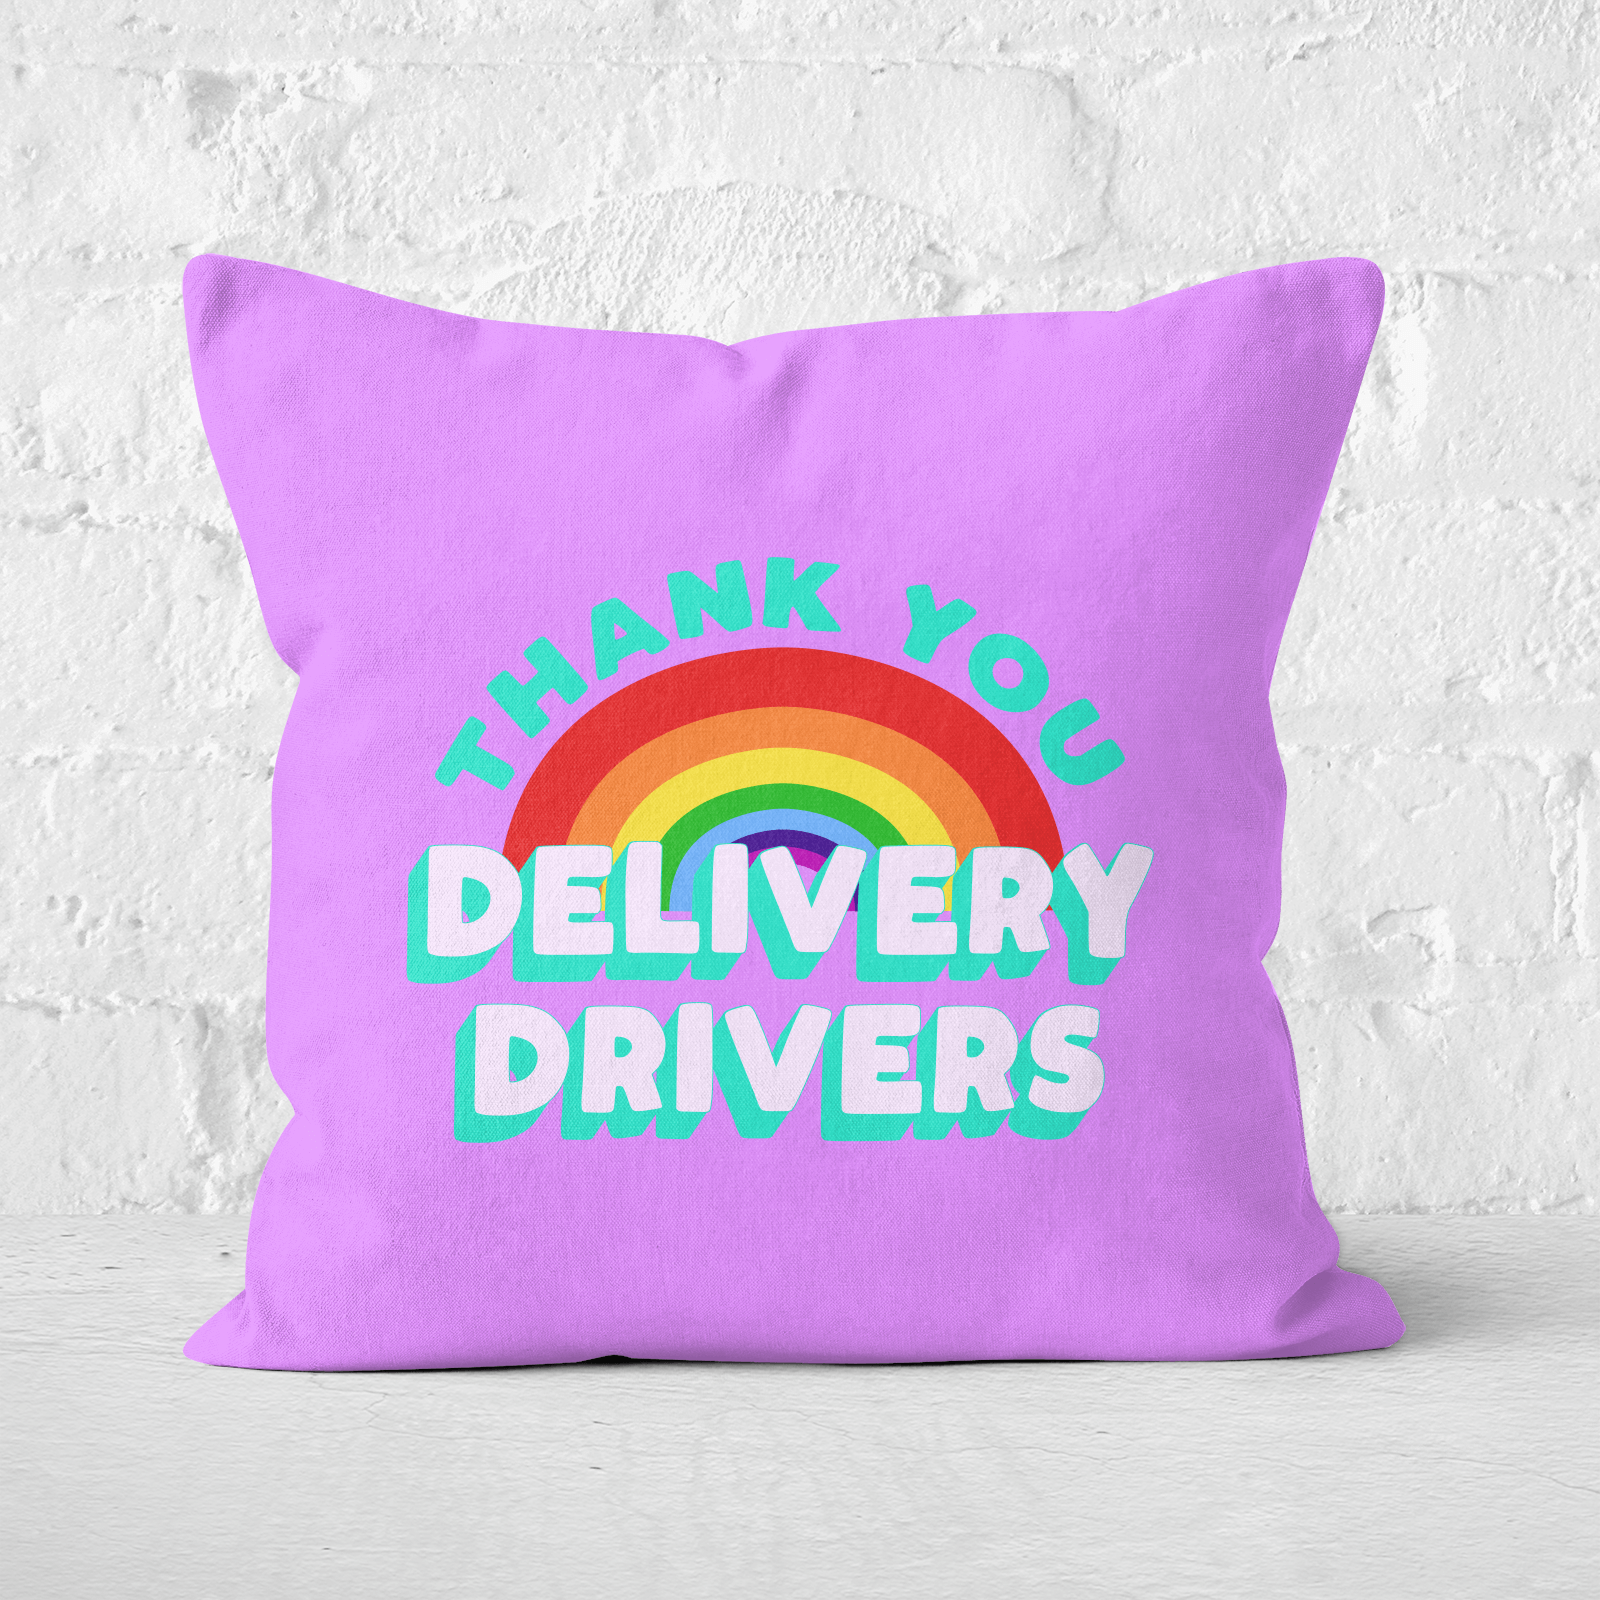 Thank You Delivery Drivers Square Cushion - 60x60cm - Soft Touch